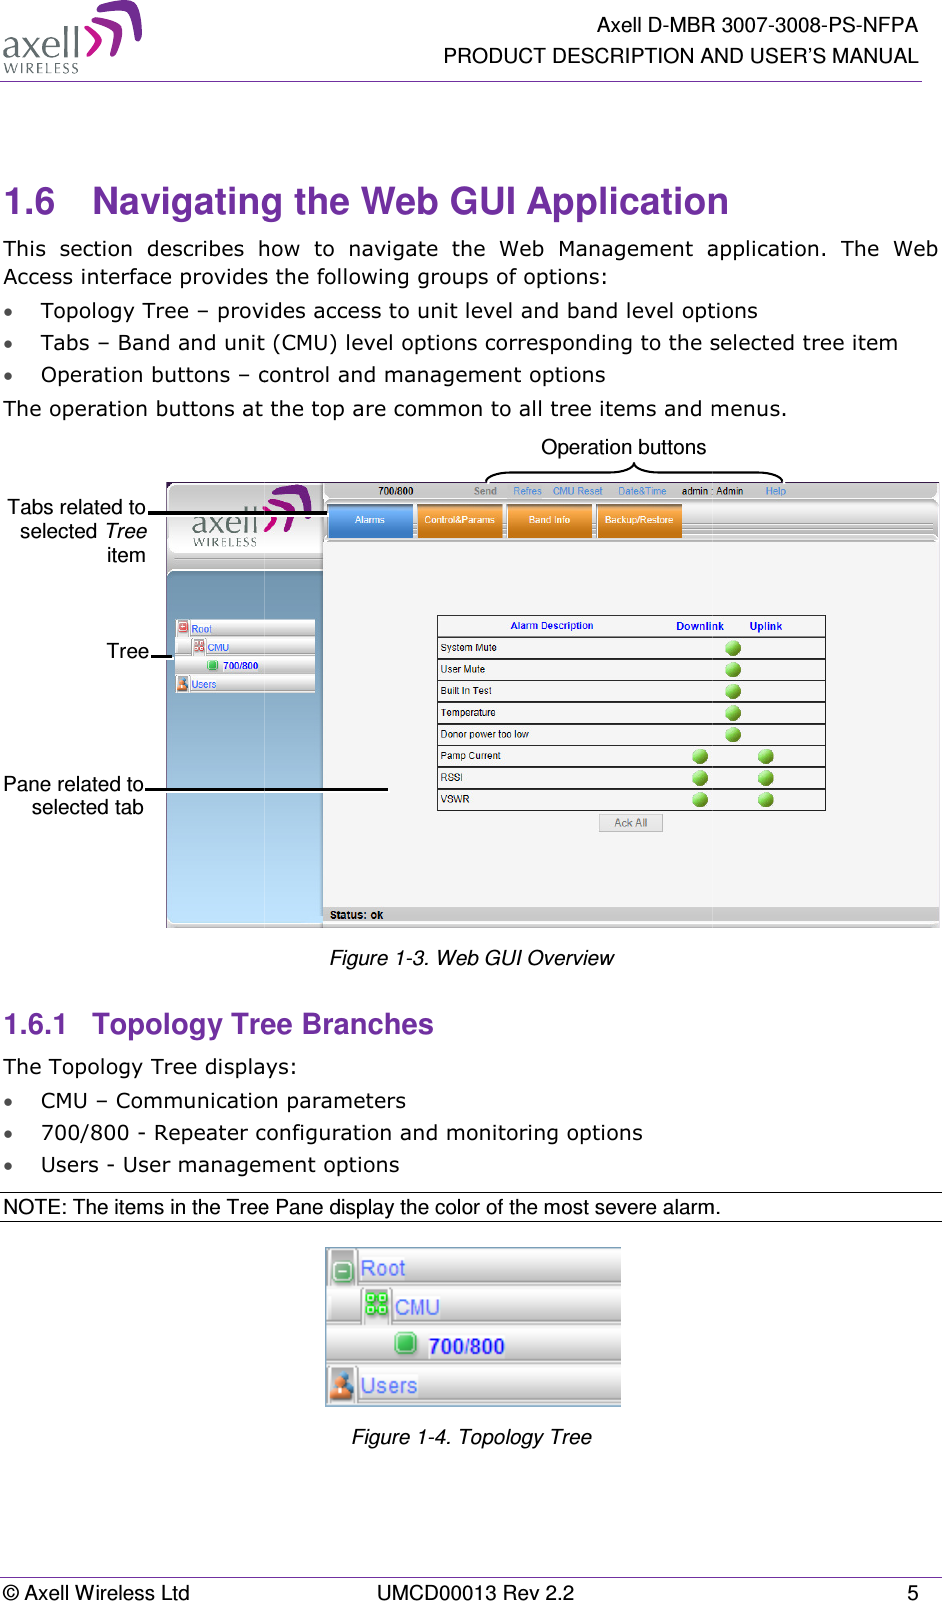 © Axell Wireless Ltd   1.6 NavigatingThis  section  describes  hoAccess interface provides • Topology Tree – provid• Tabs – Band and unit (• Operation buttons – coThe operation buttons at t 1.6.1 Topology TreThe Topology Tree display• CMU – Communication• 700/800 - Repeater co• Users - User managemNOTE: The items in the Tree Tree Pane related to selected tabTabs related to selected Treeitem  Axell D-MBRPRODUCT DESCRIPTION AUMCD00013 Rev 2.2 ng the Web GUI Application  how  to  navigate  the  Web  Management  apes the following groups of options:  ovides access to unit level and band level optionit (CMU) level options corresponding to the secontrol and management options  at the top are common to all tree items and mFigure  1-3. Web GUI Overview ree Branches  plays:  tion parameters r configuration and monitoring options gement options ee Pane display the color of the most severe alarm Figure  1-4. Topology Tree  Operation buttons R 3007-3008-PS-NFPA  AND USER’S MANUAL 5 on  t  application.  The  Web ptions e selected tree item d menus.  m.  